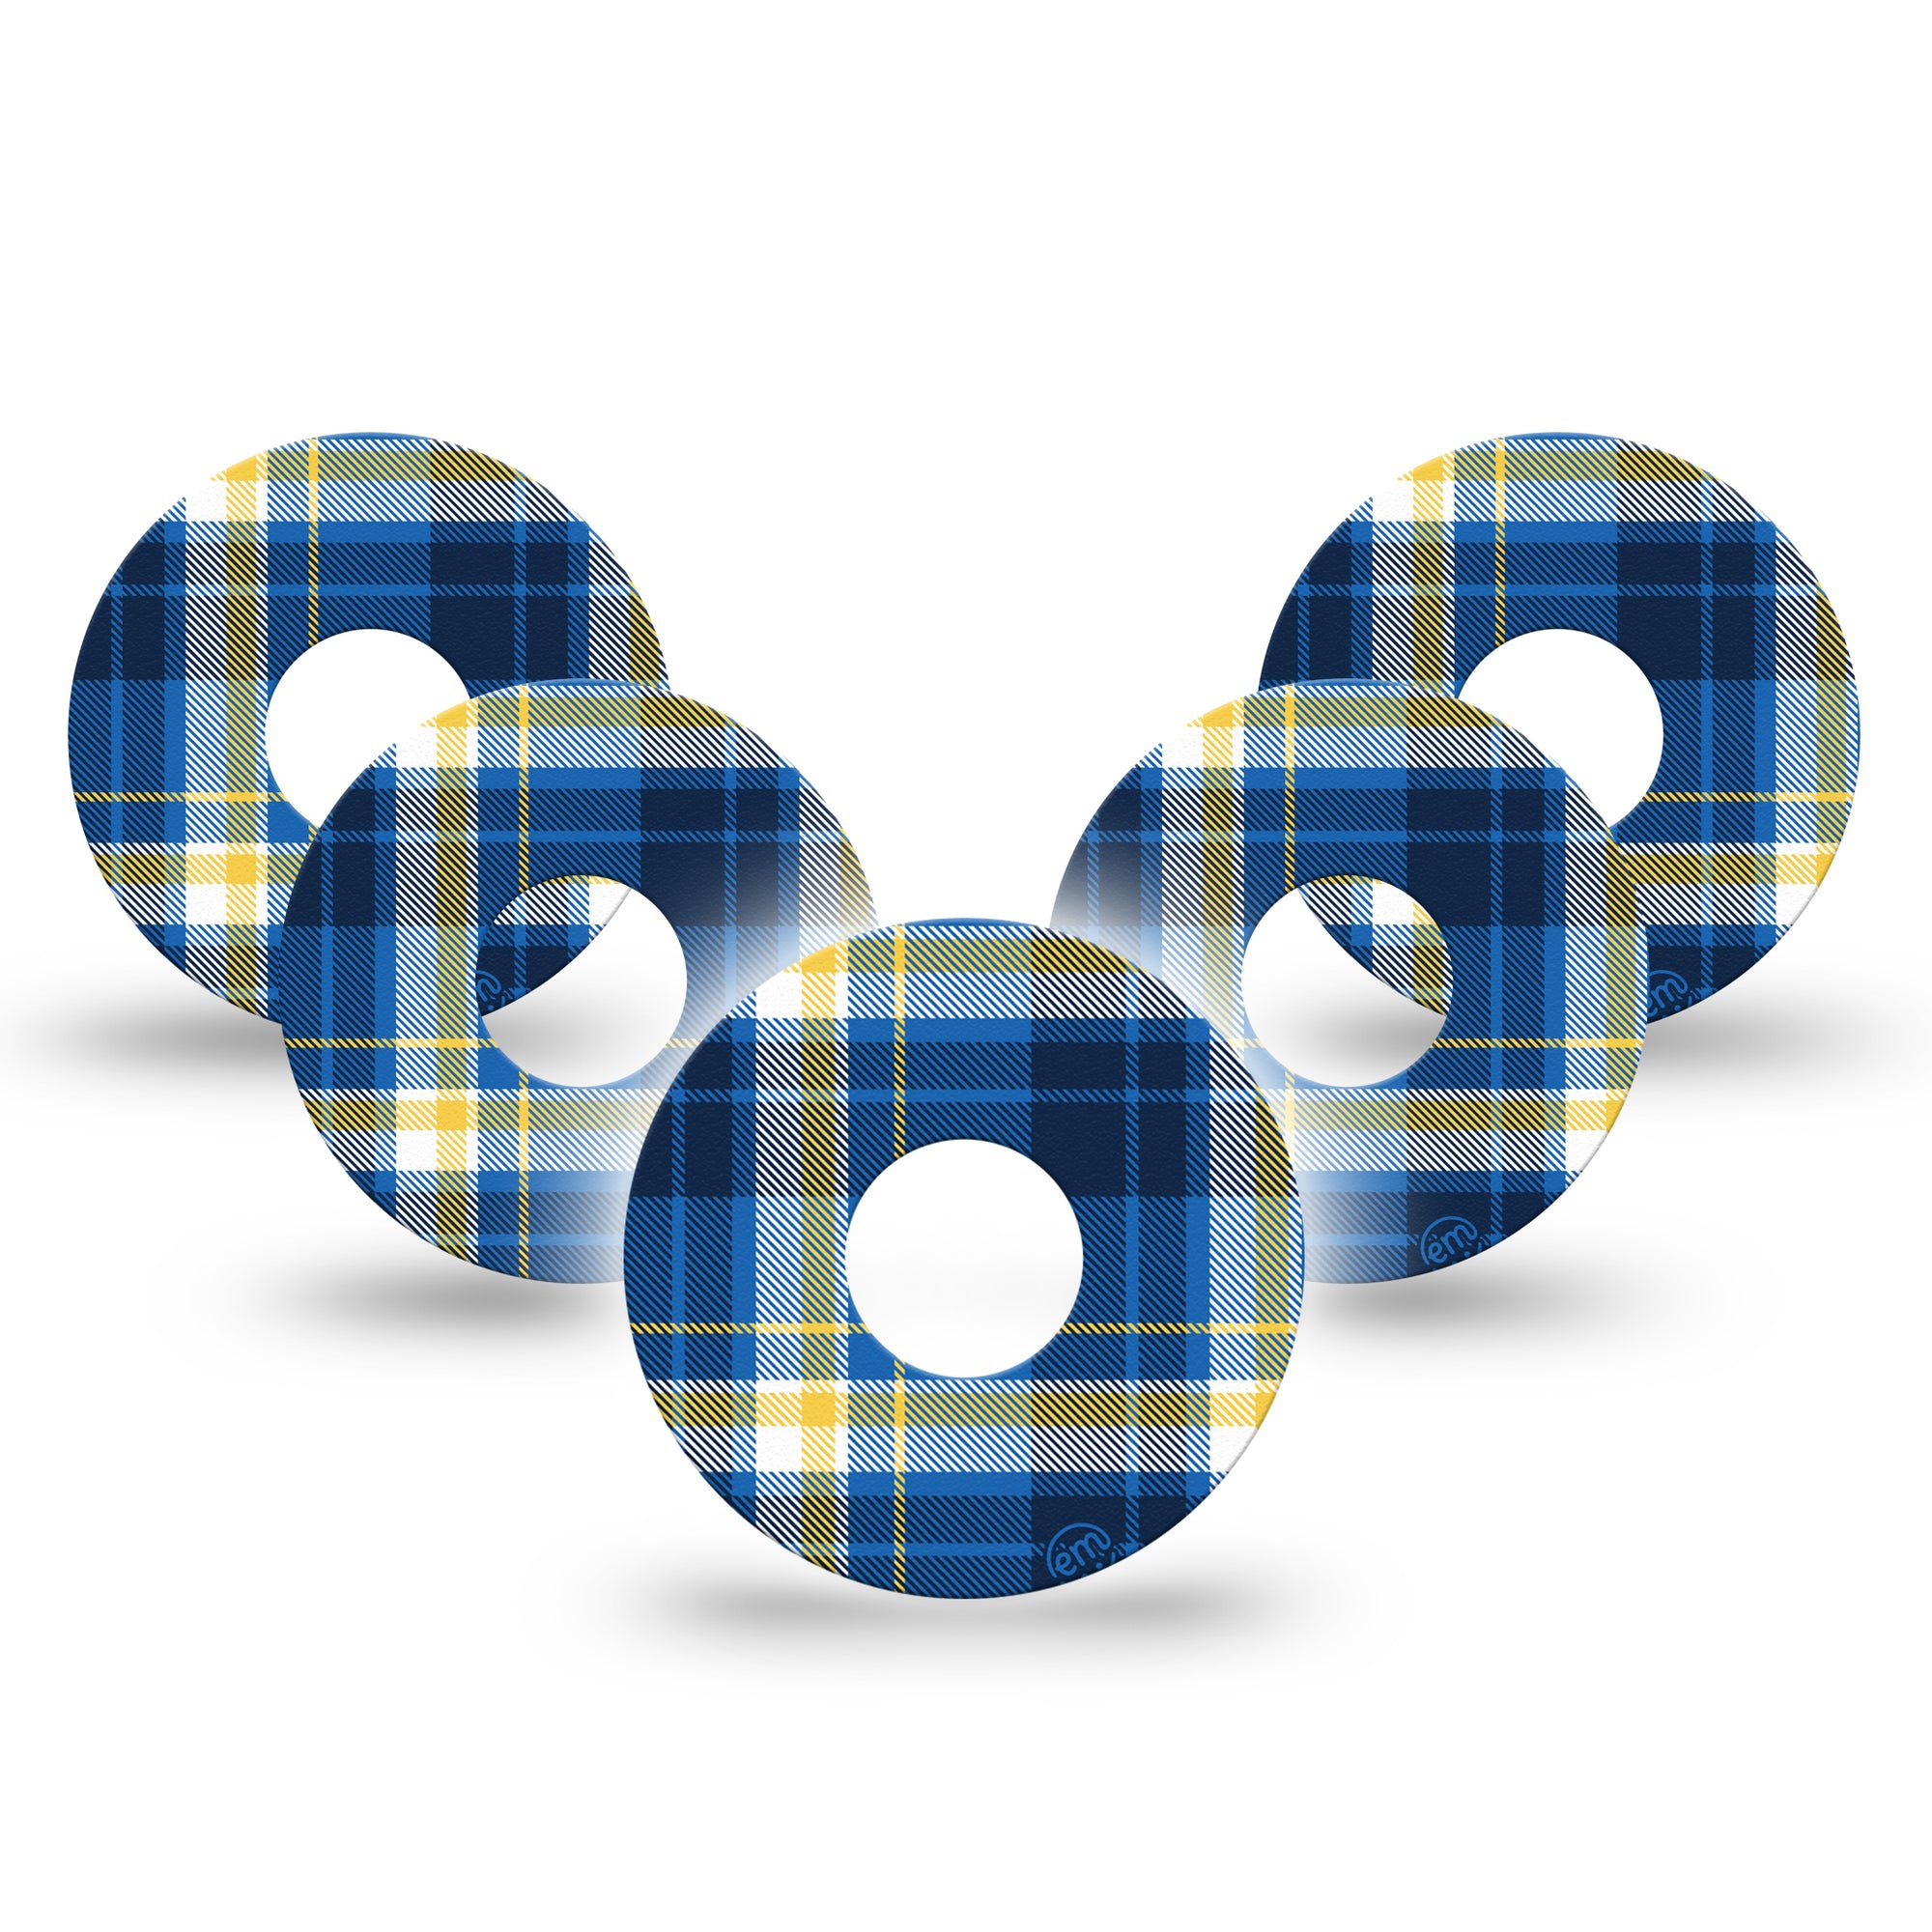 Blue Plaid Libre 3 Tape, 5-Pack, Shades of Blue and Yellow Plaid CGM Overlay Patch Design